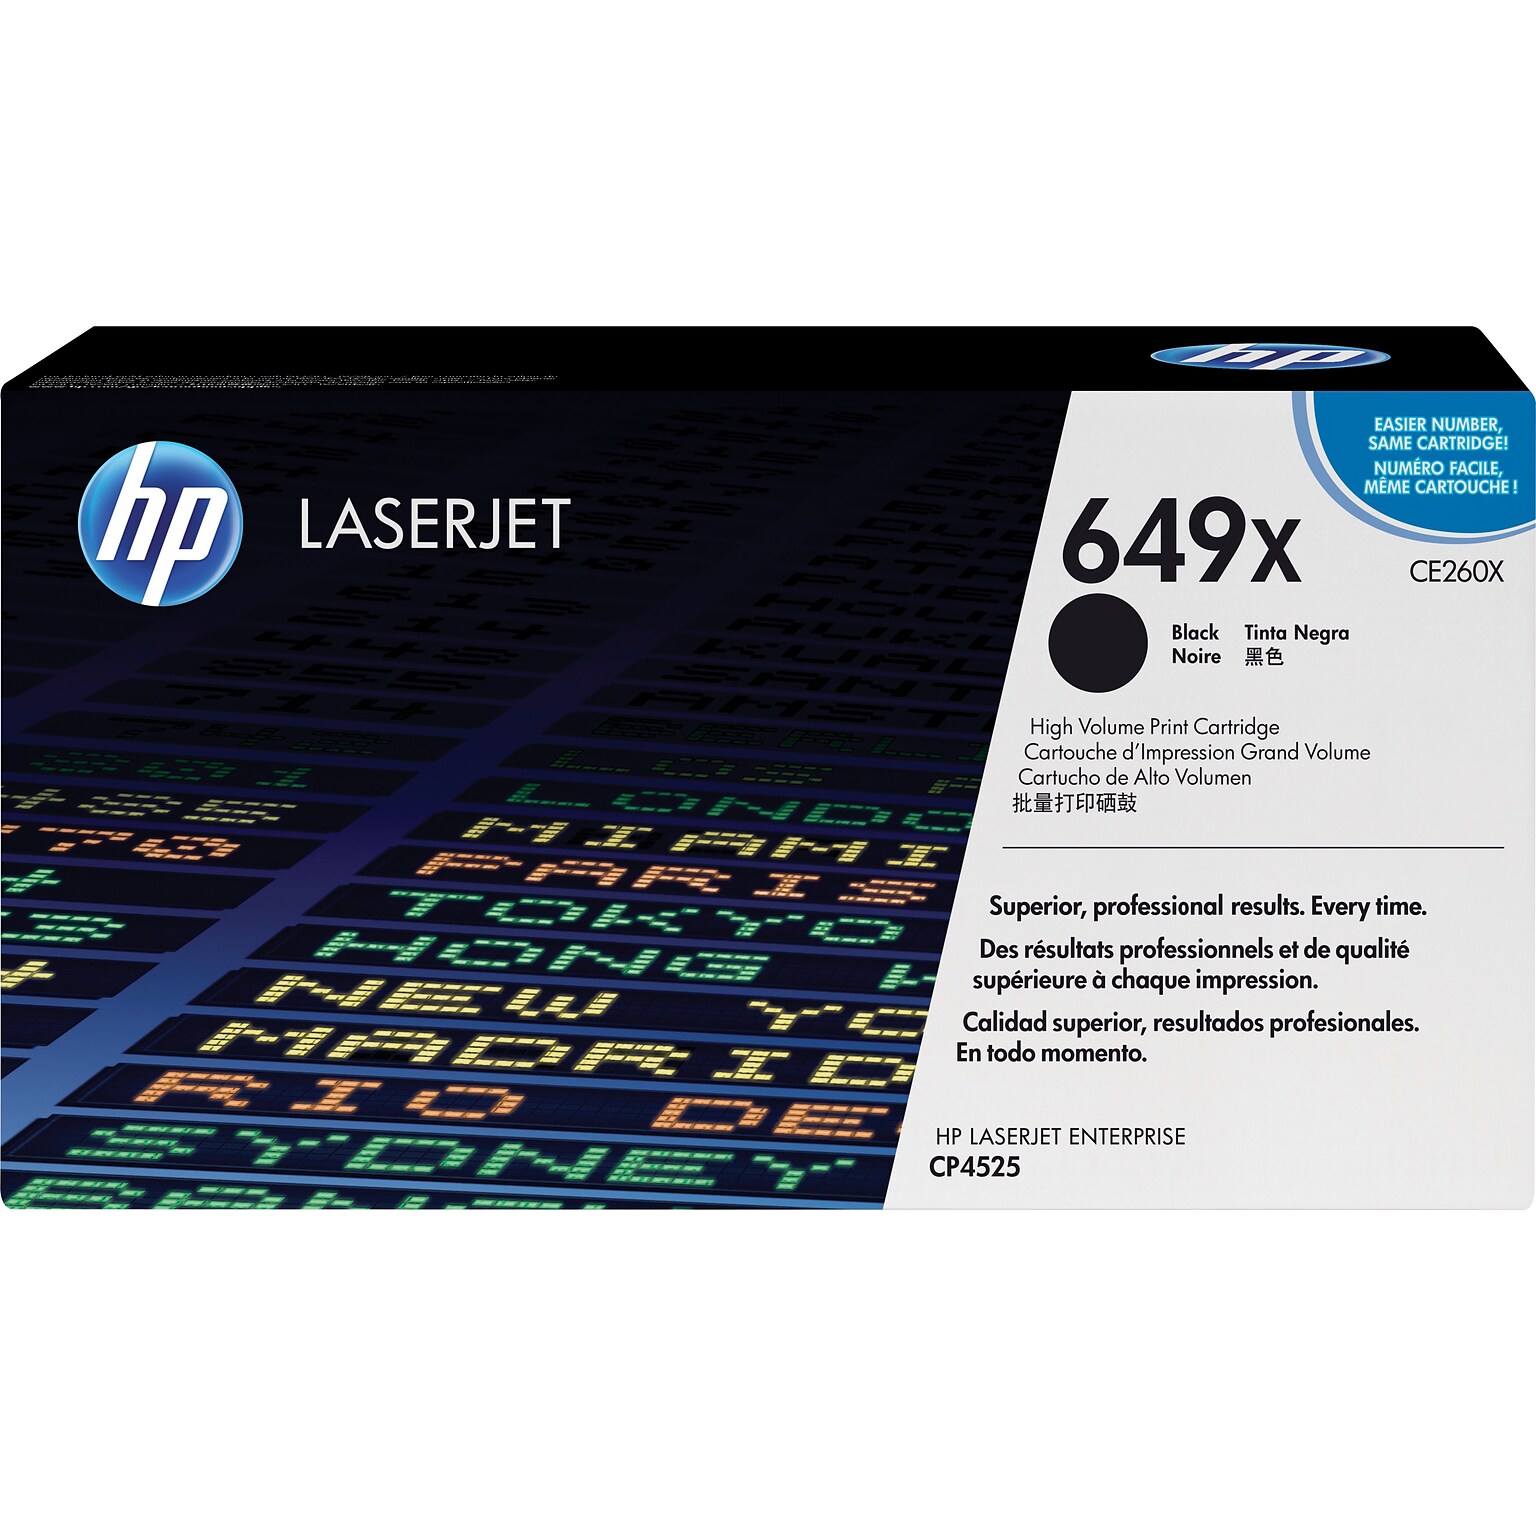 HP 649X Black High Yield Toner Cartridge, Prints Up to 17,000 Pages (CE260X)